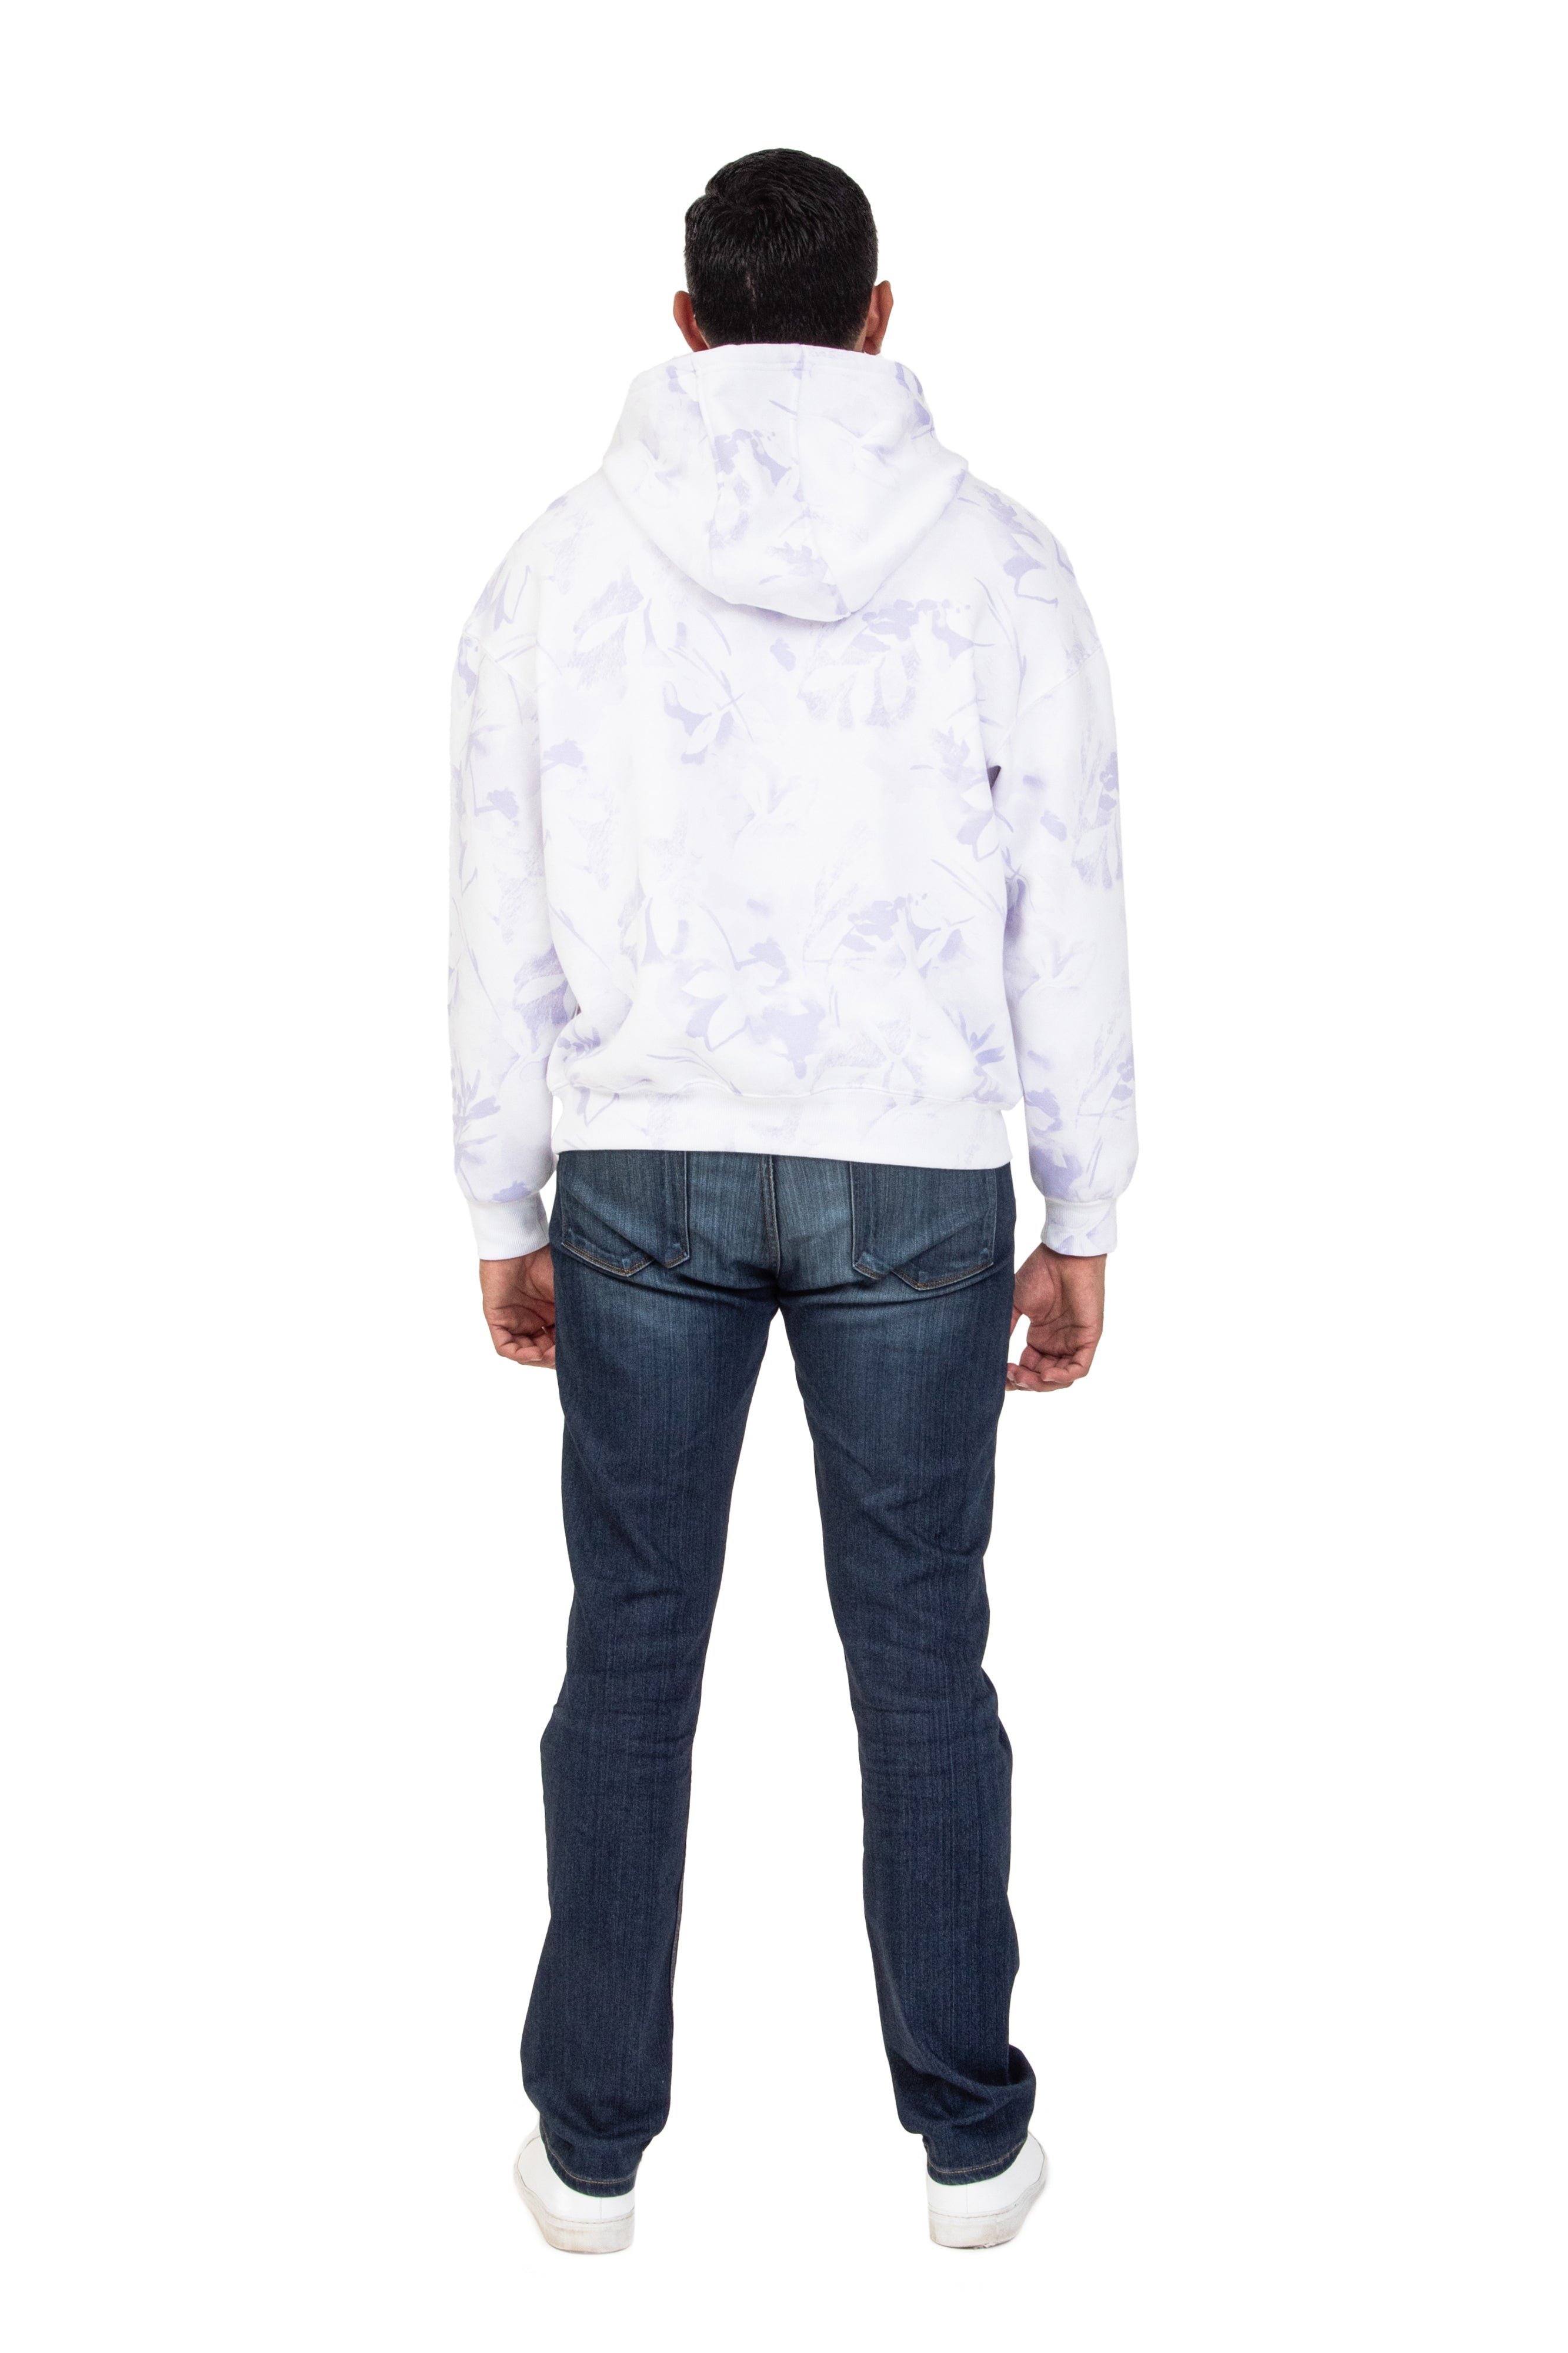 Men's Relaxed Fit Hoodie in Lavender Floral print